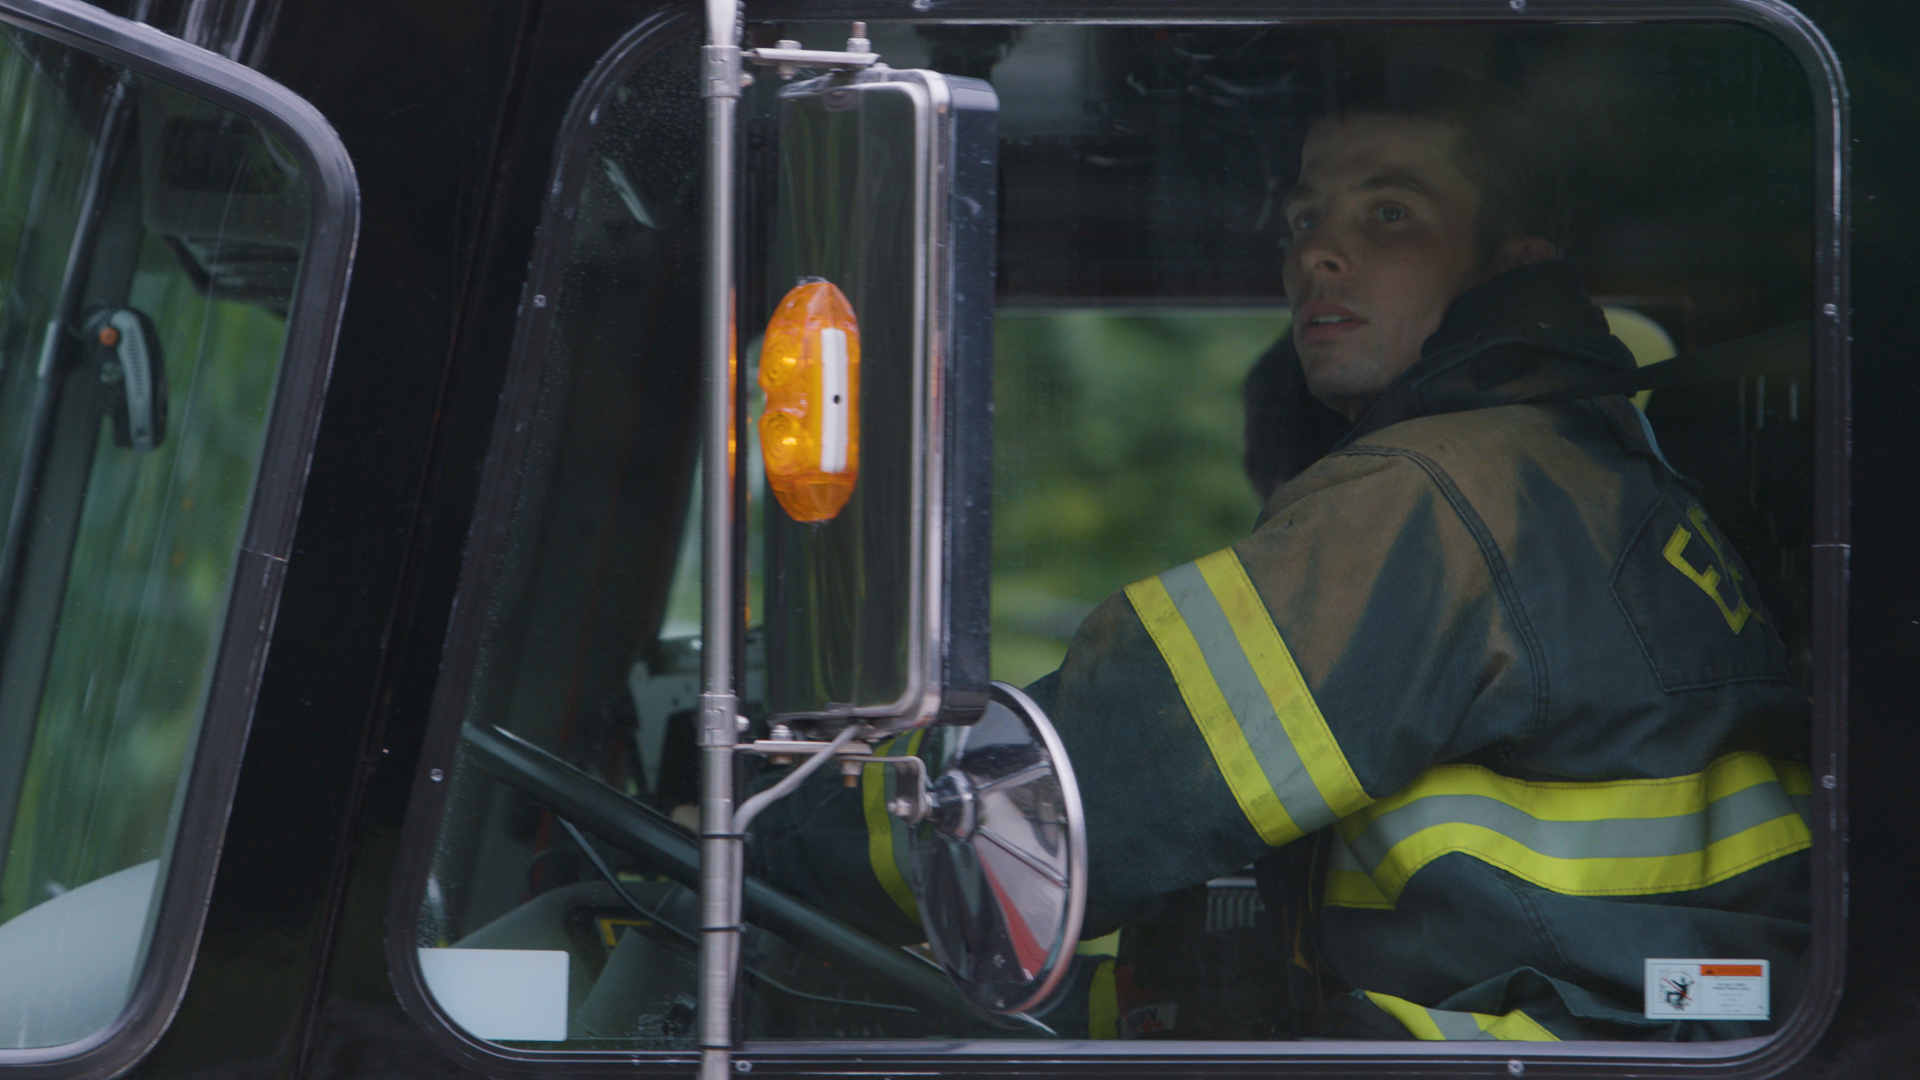 Josh LeClair captures a young firefighter driving the truck